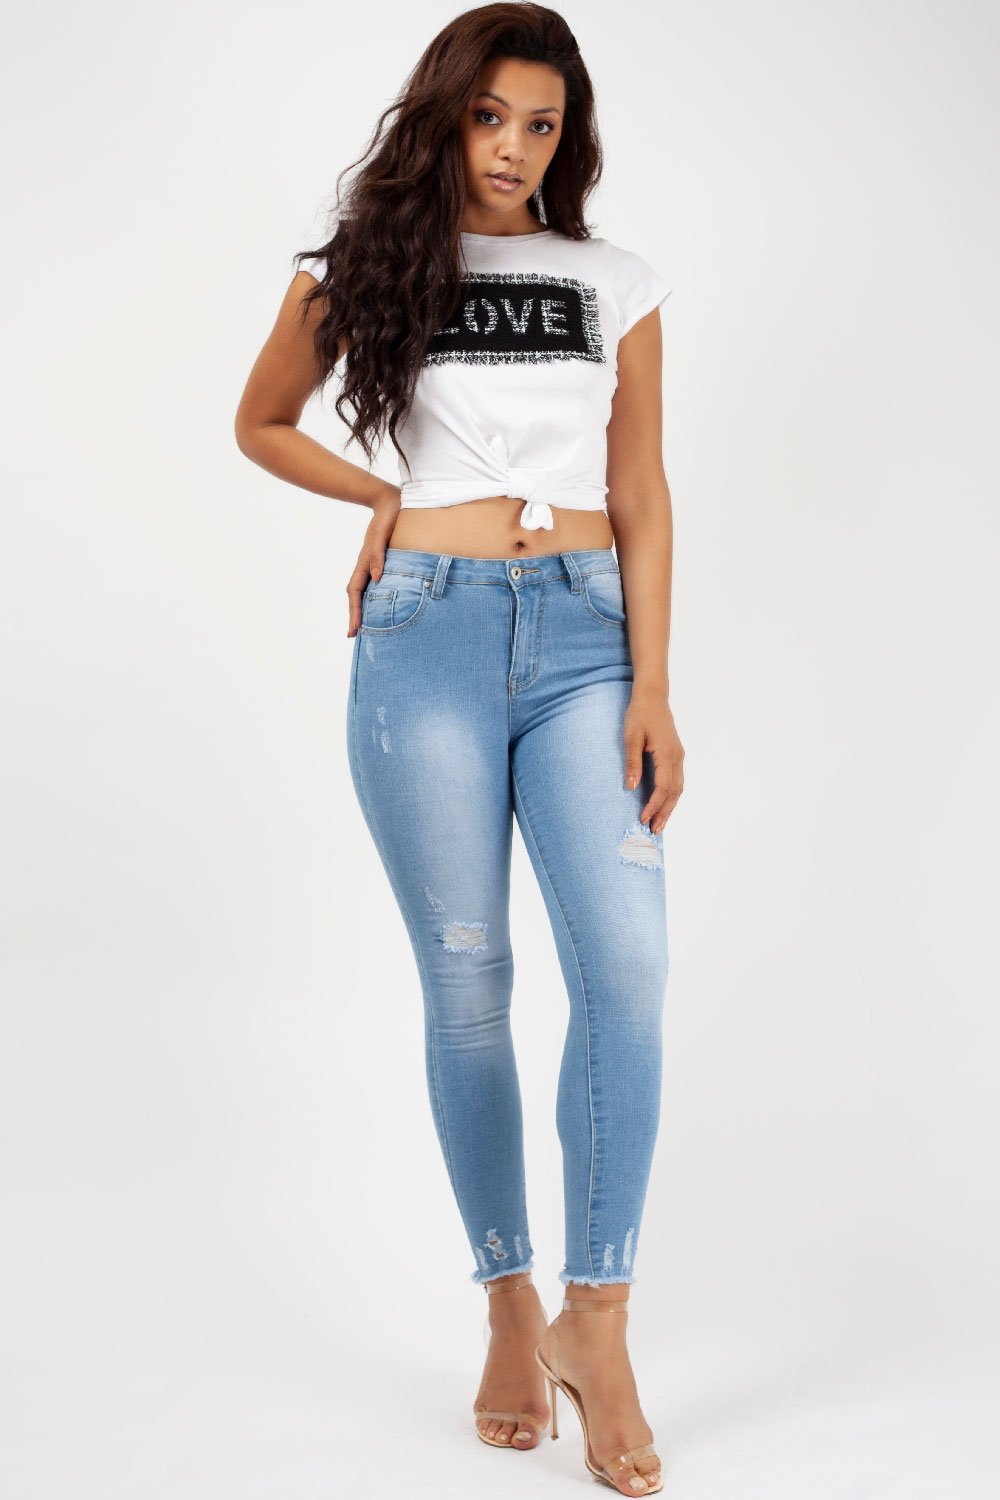 Light Blue Skinny Ripped Jeans Promotions